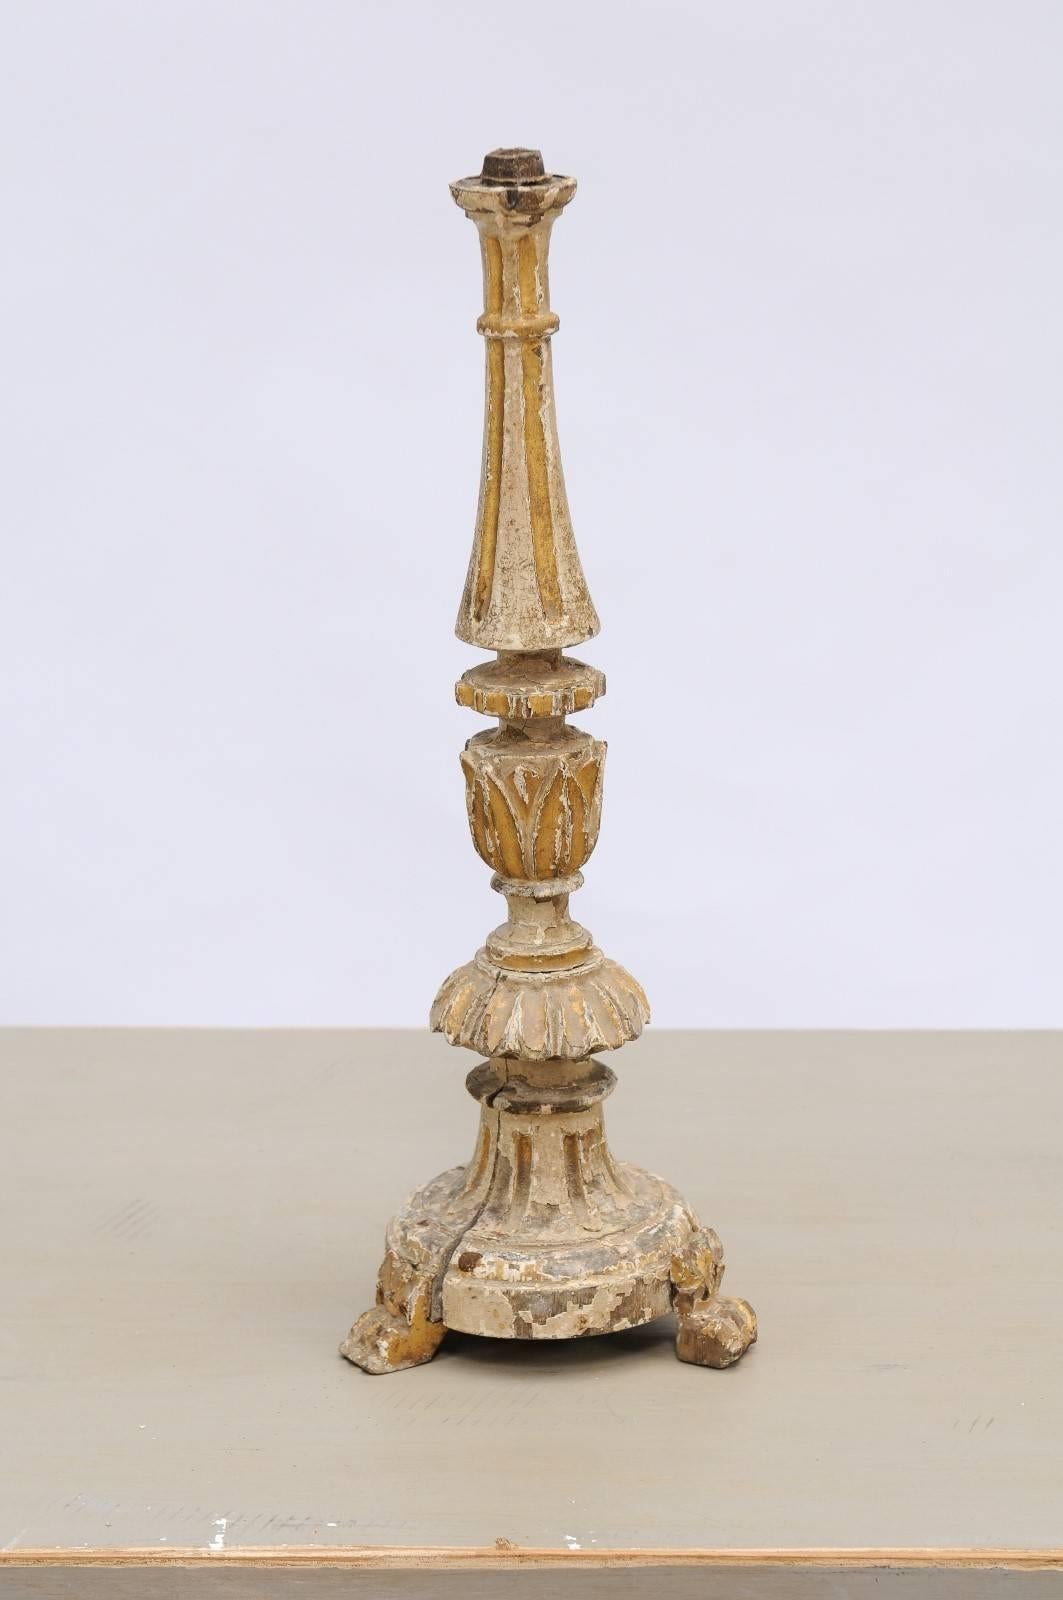 Wood Petite Painted and Gilded Portuguese 18th Century Candlestick with Rais-de-Coeur